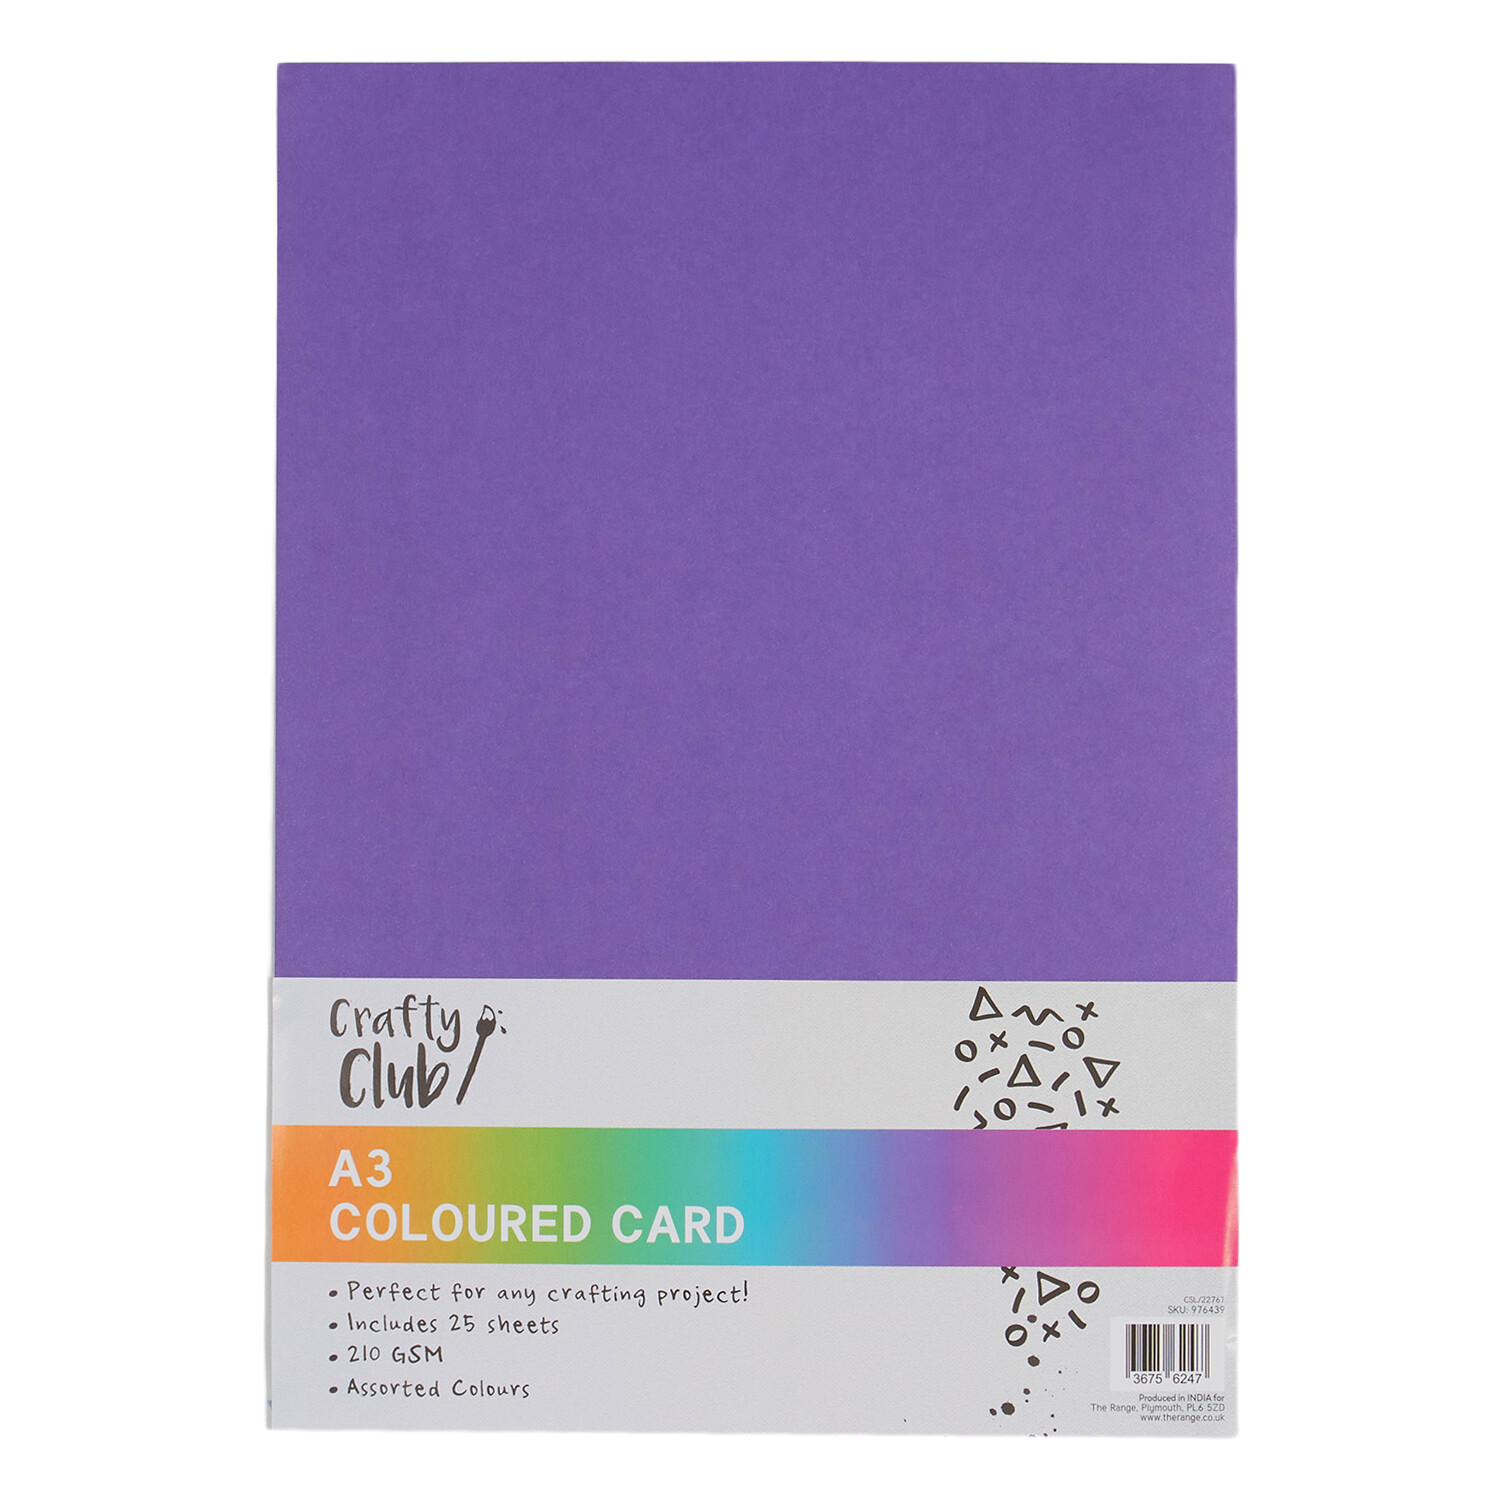 Single Crafty Club A3 Coloured Cards 25 Pack in Assorted styles Image 1